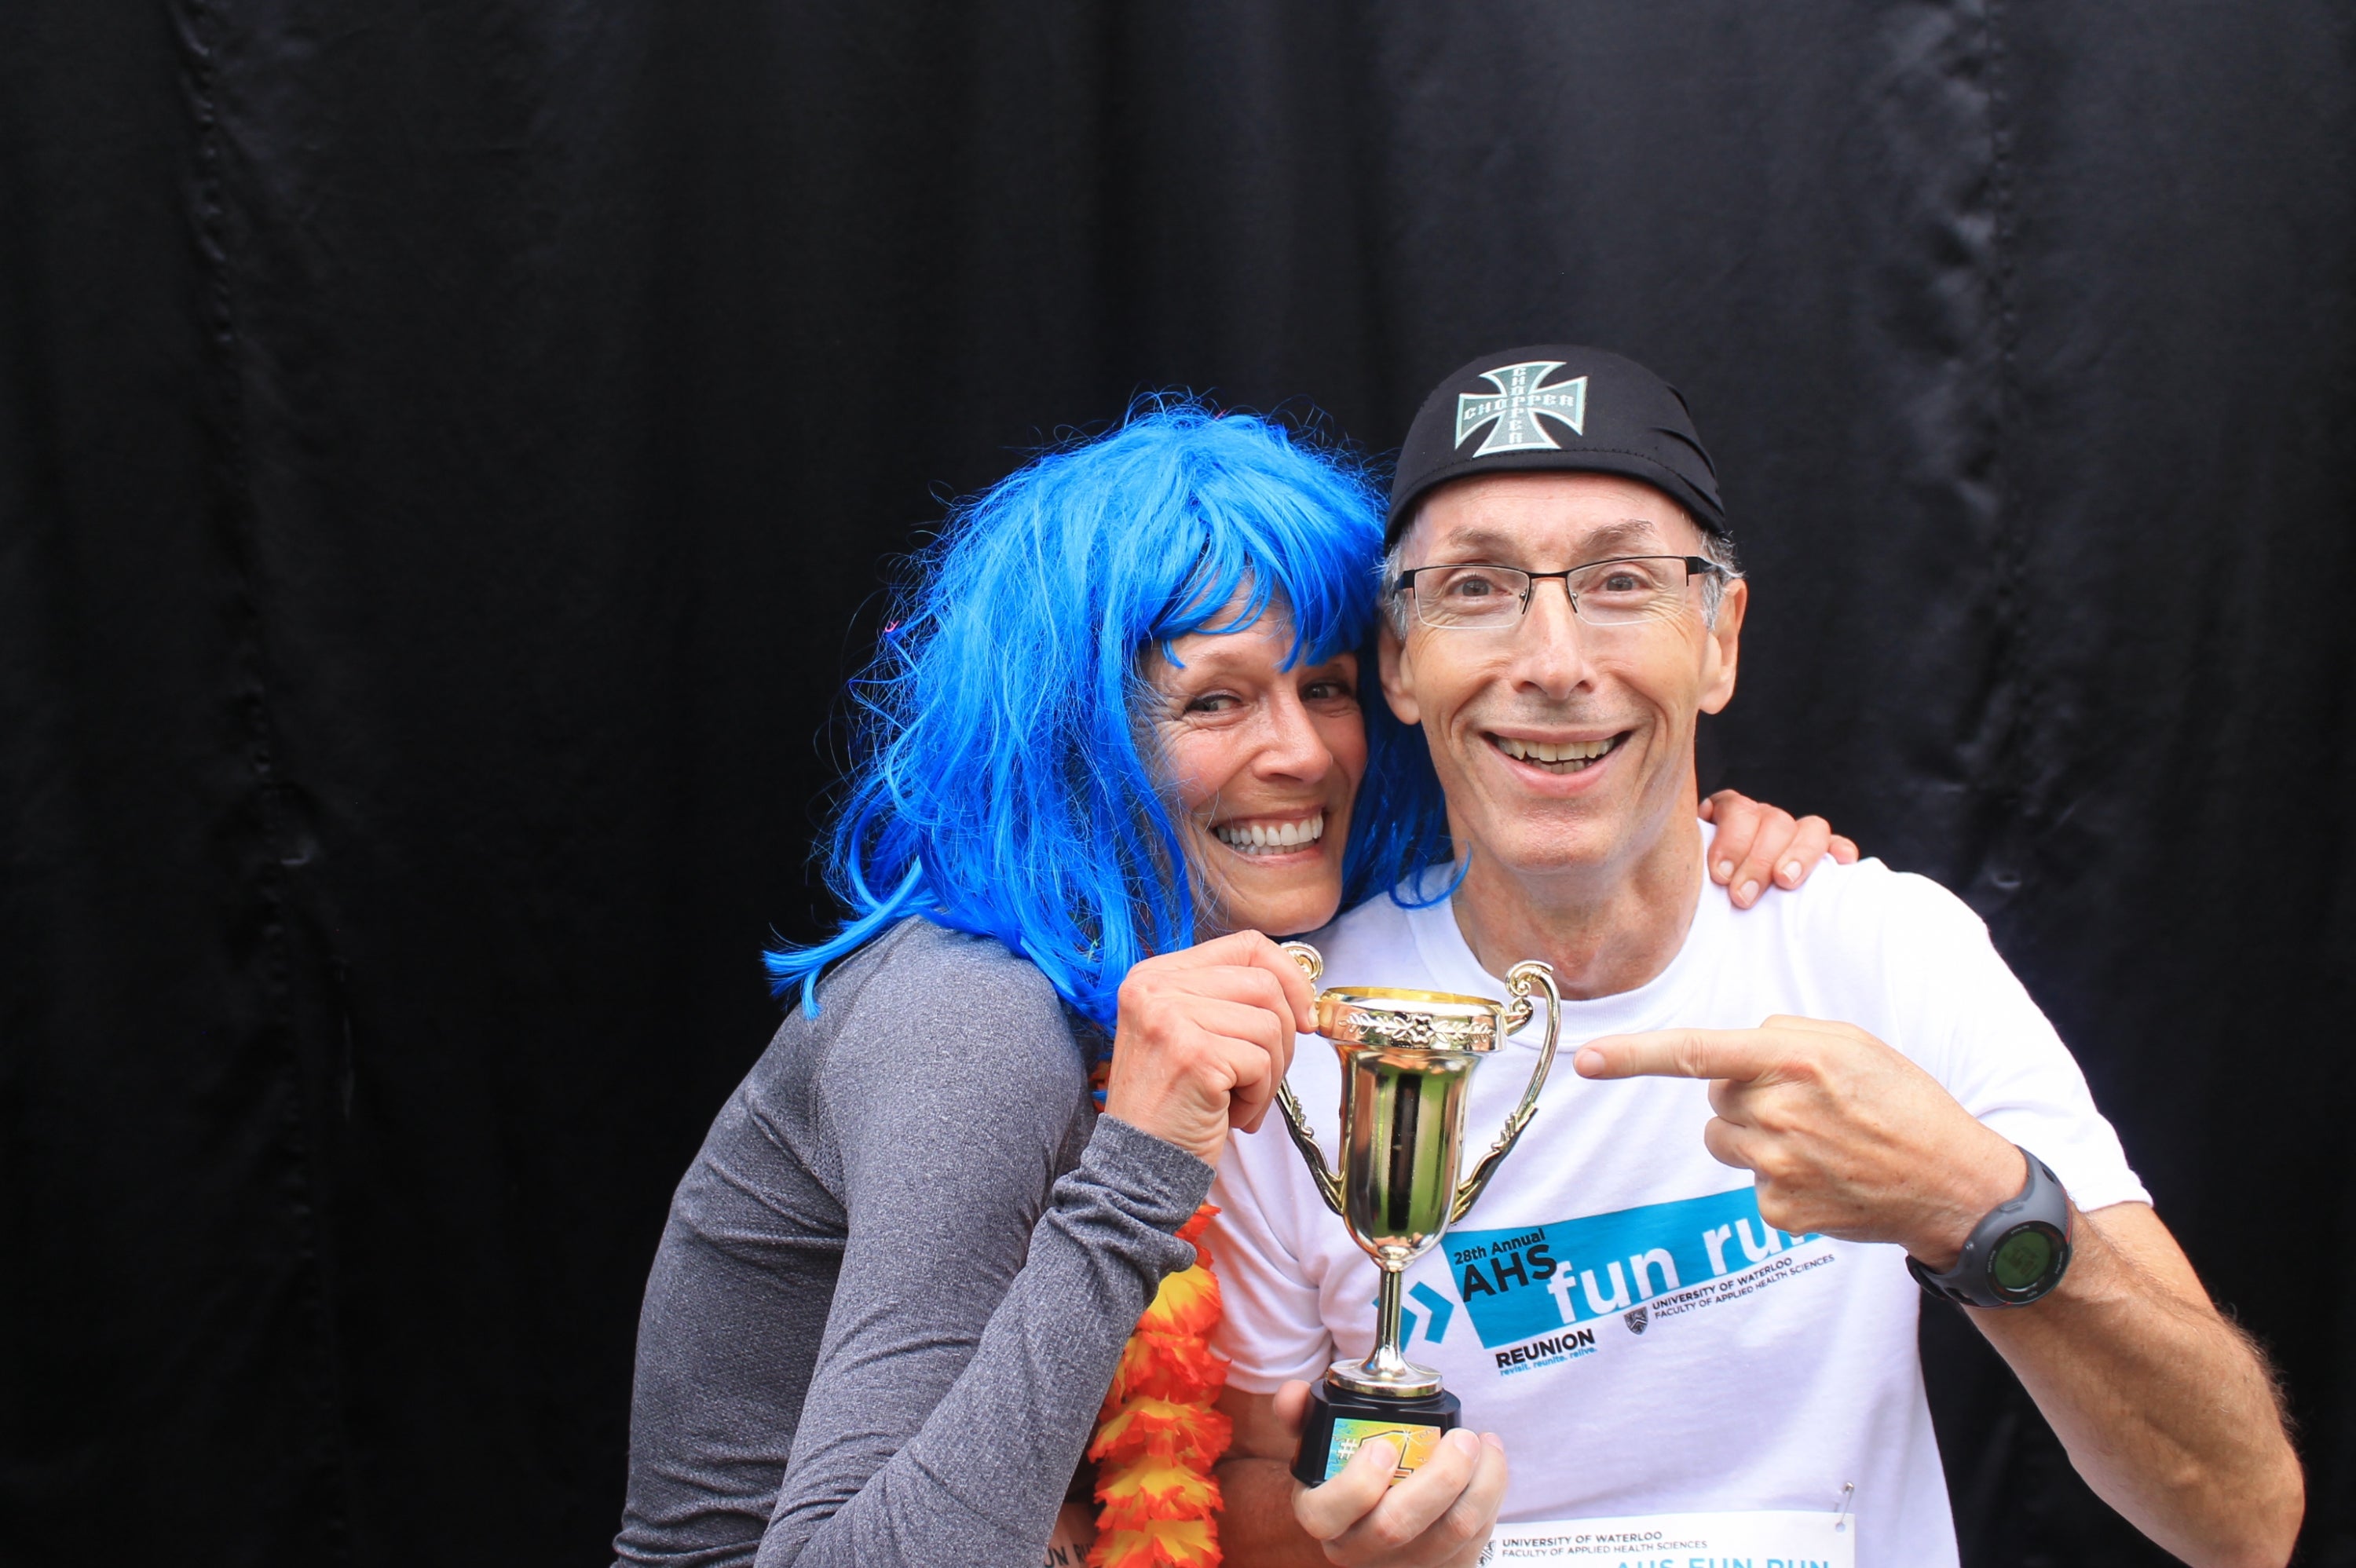 Woman wearing a blue wig and a man with a hat holding a little trophy together.